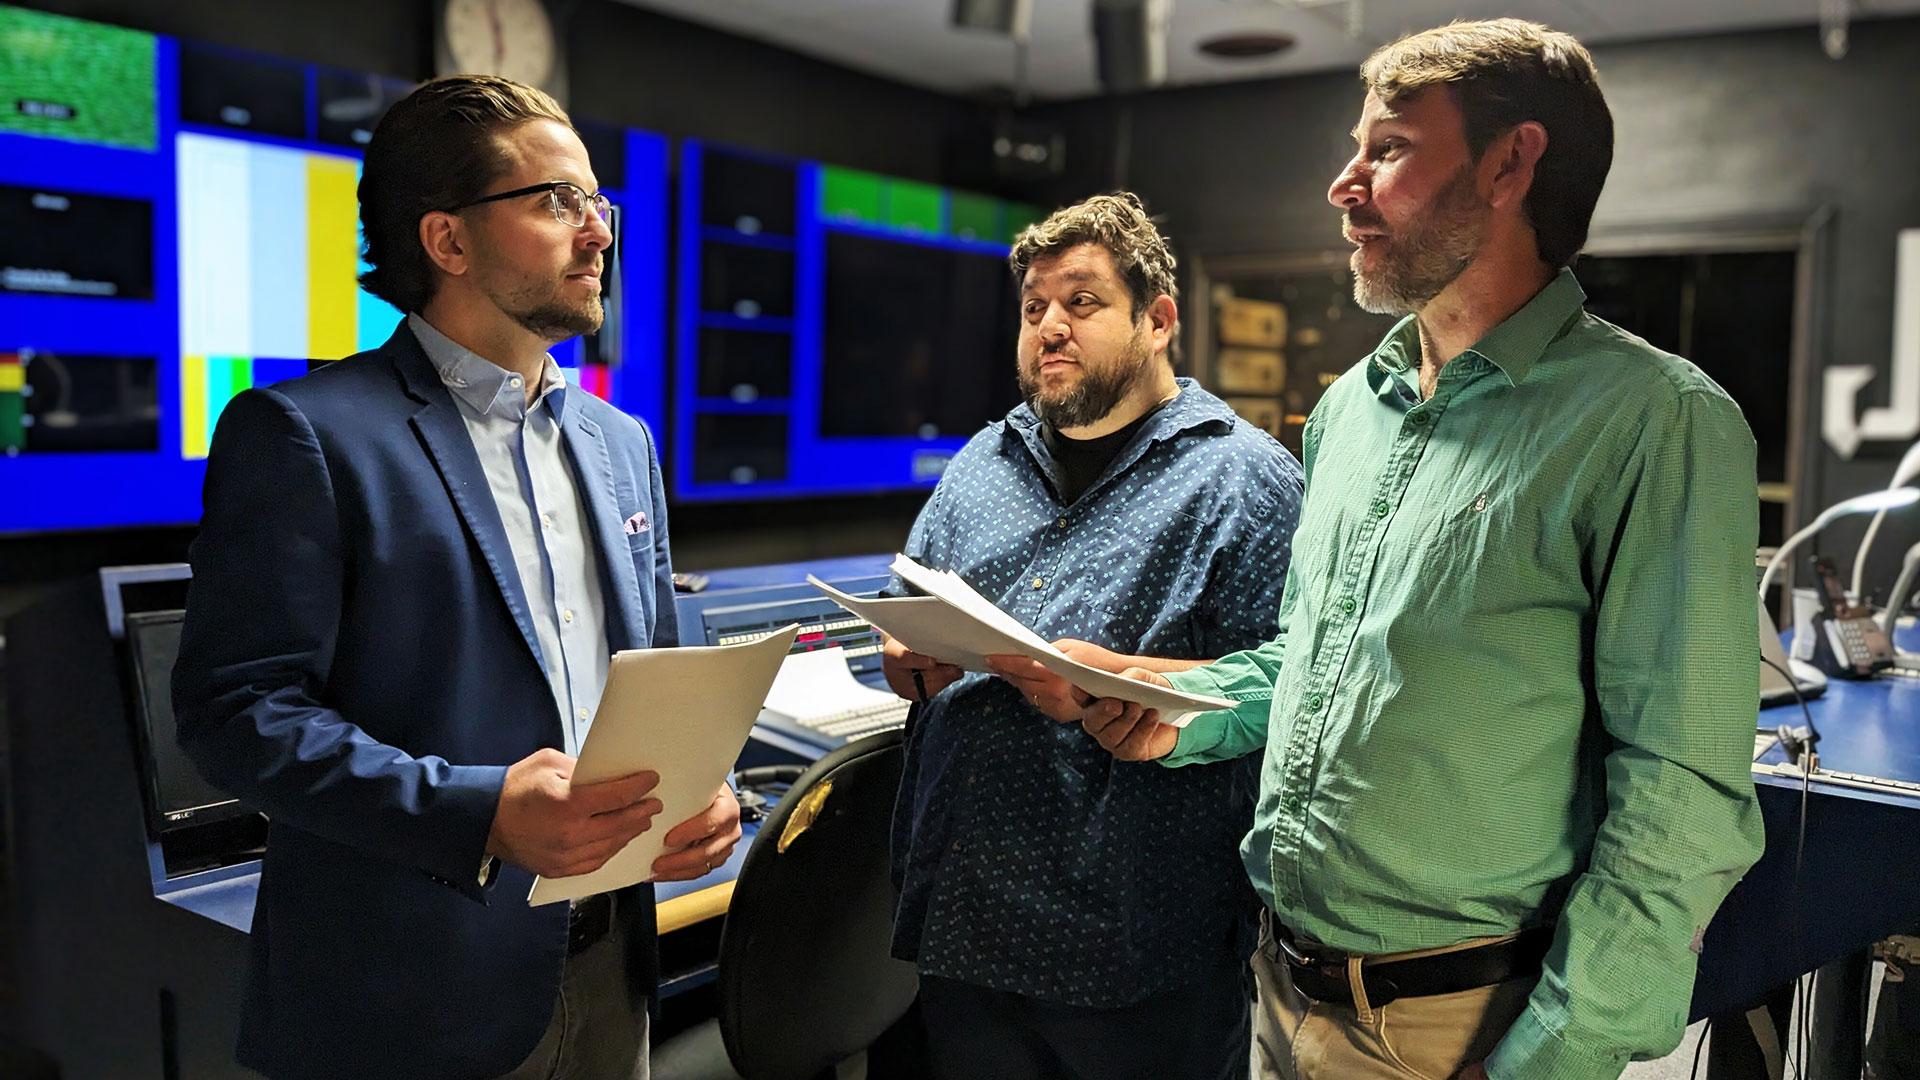 Three men engaged in a discussion in a control room with multiple screens in the background.